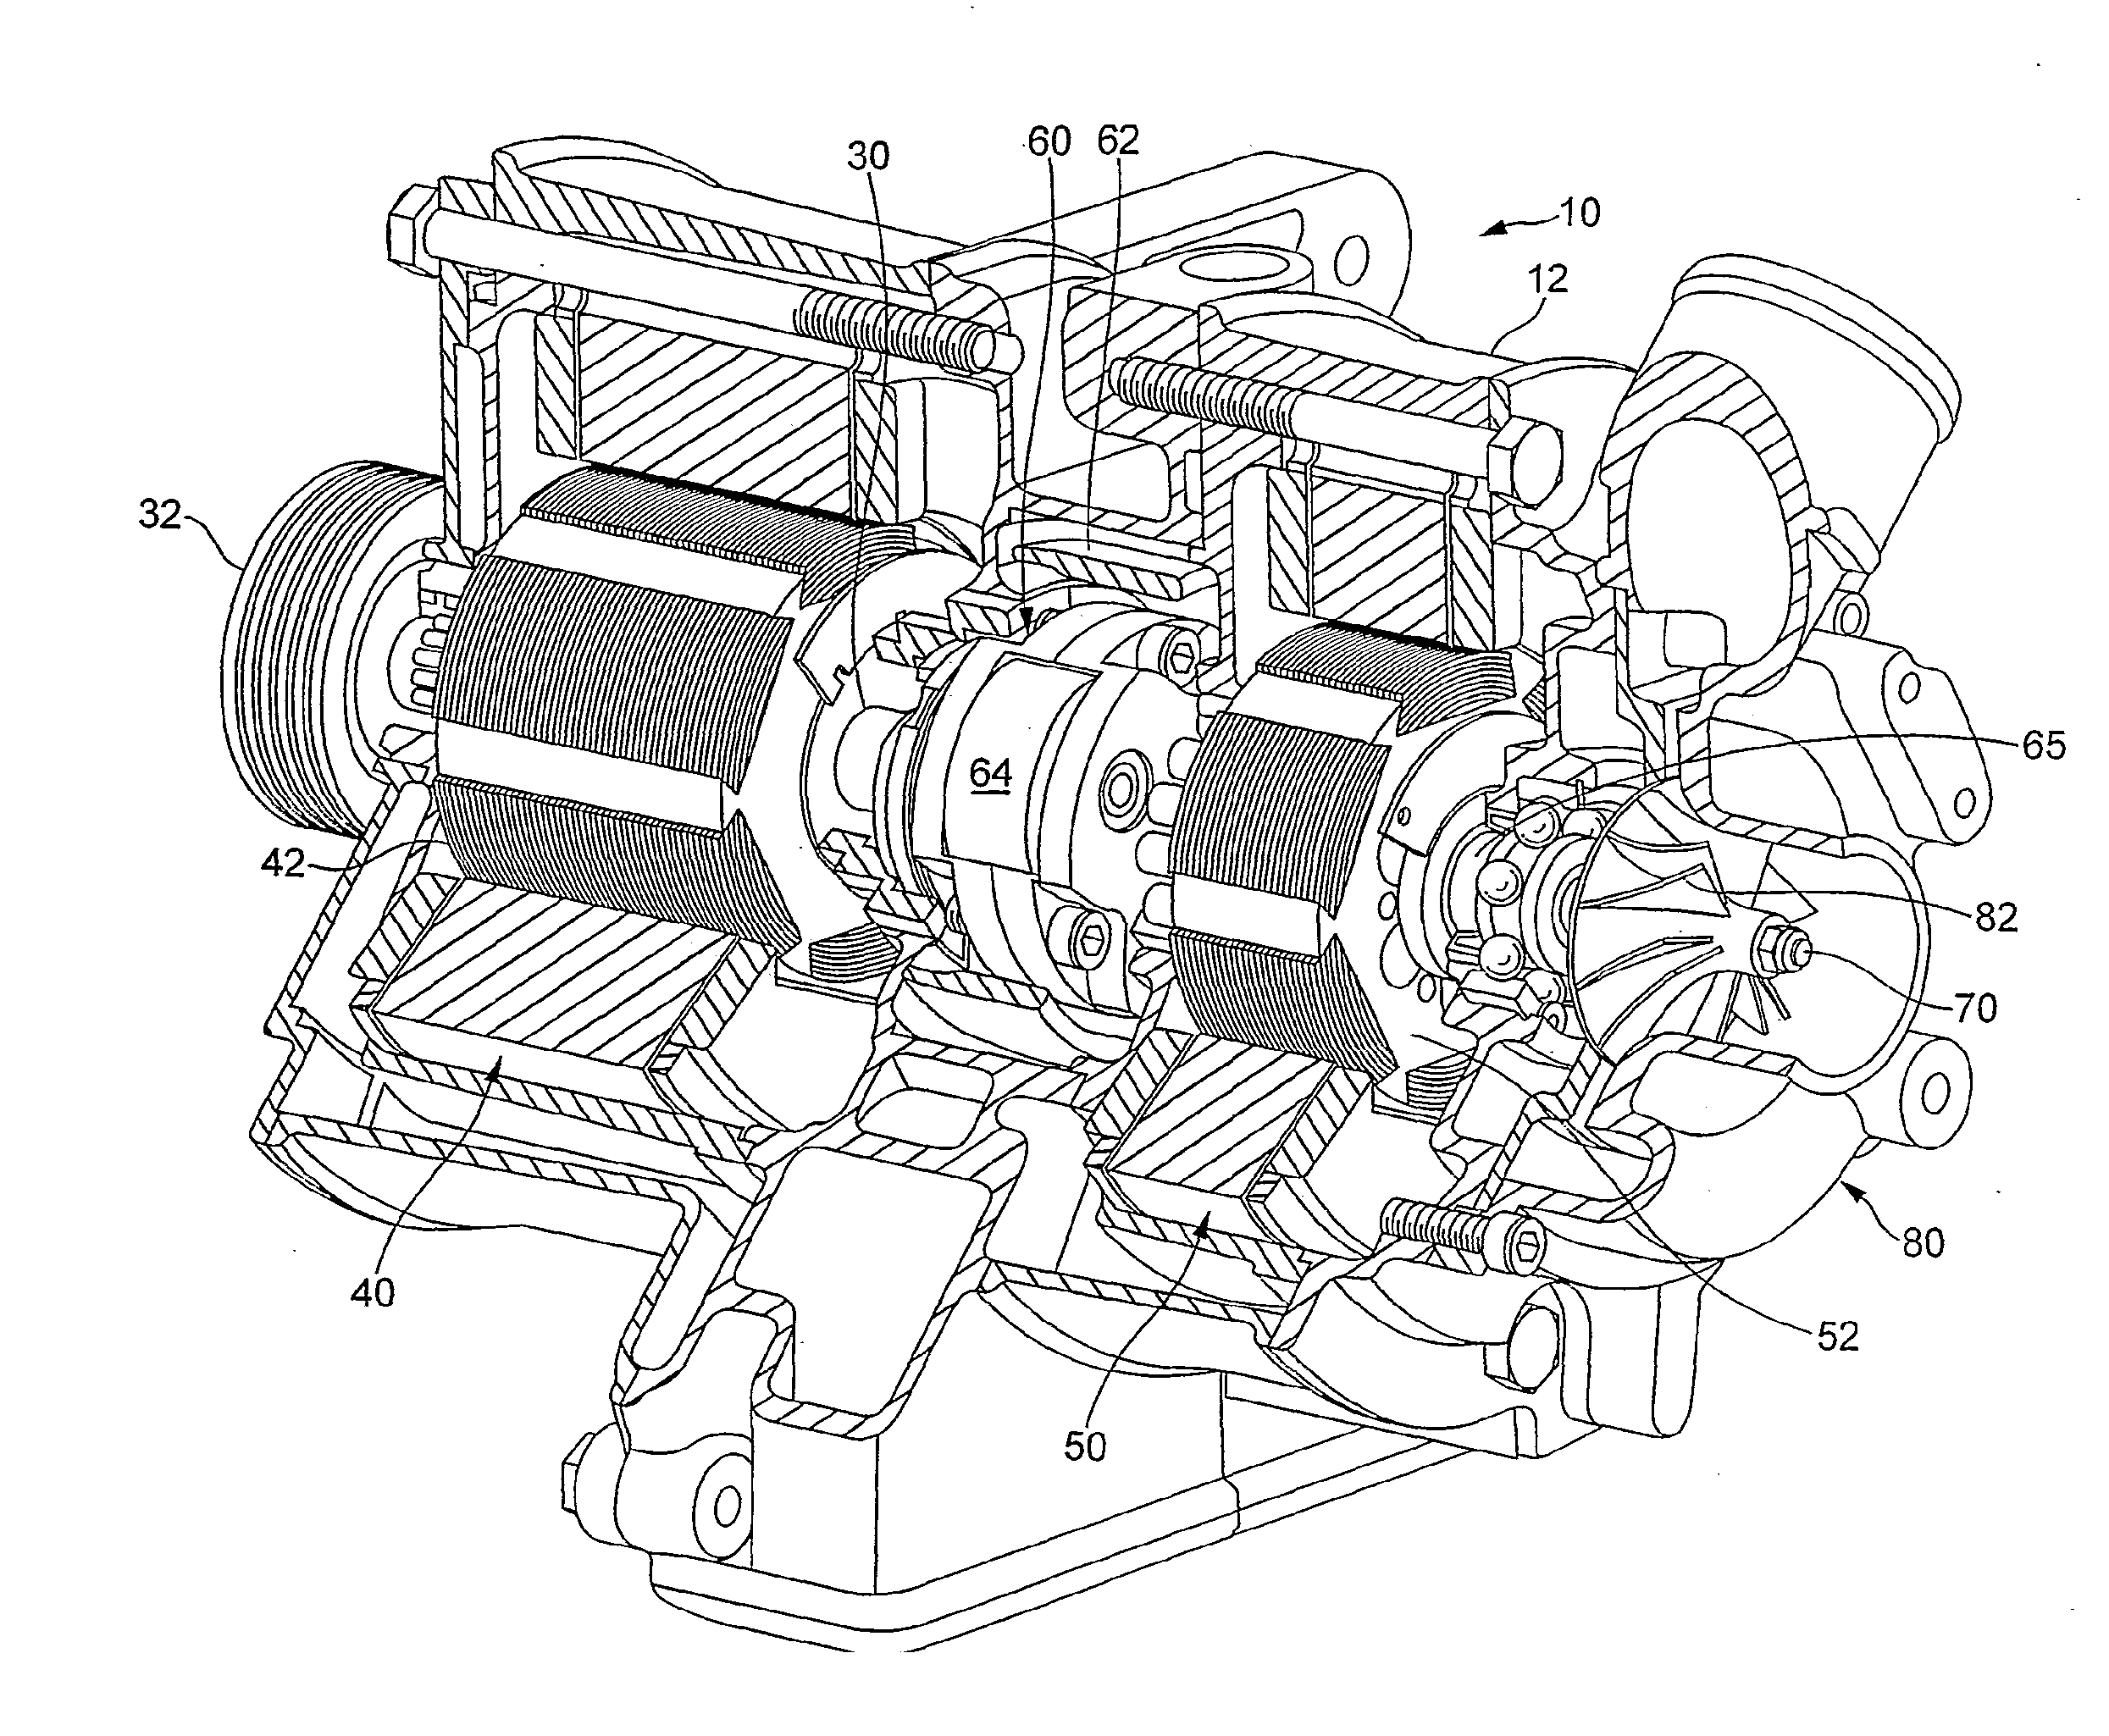 Method of operating a supercharger